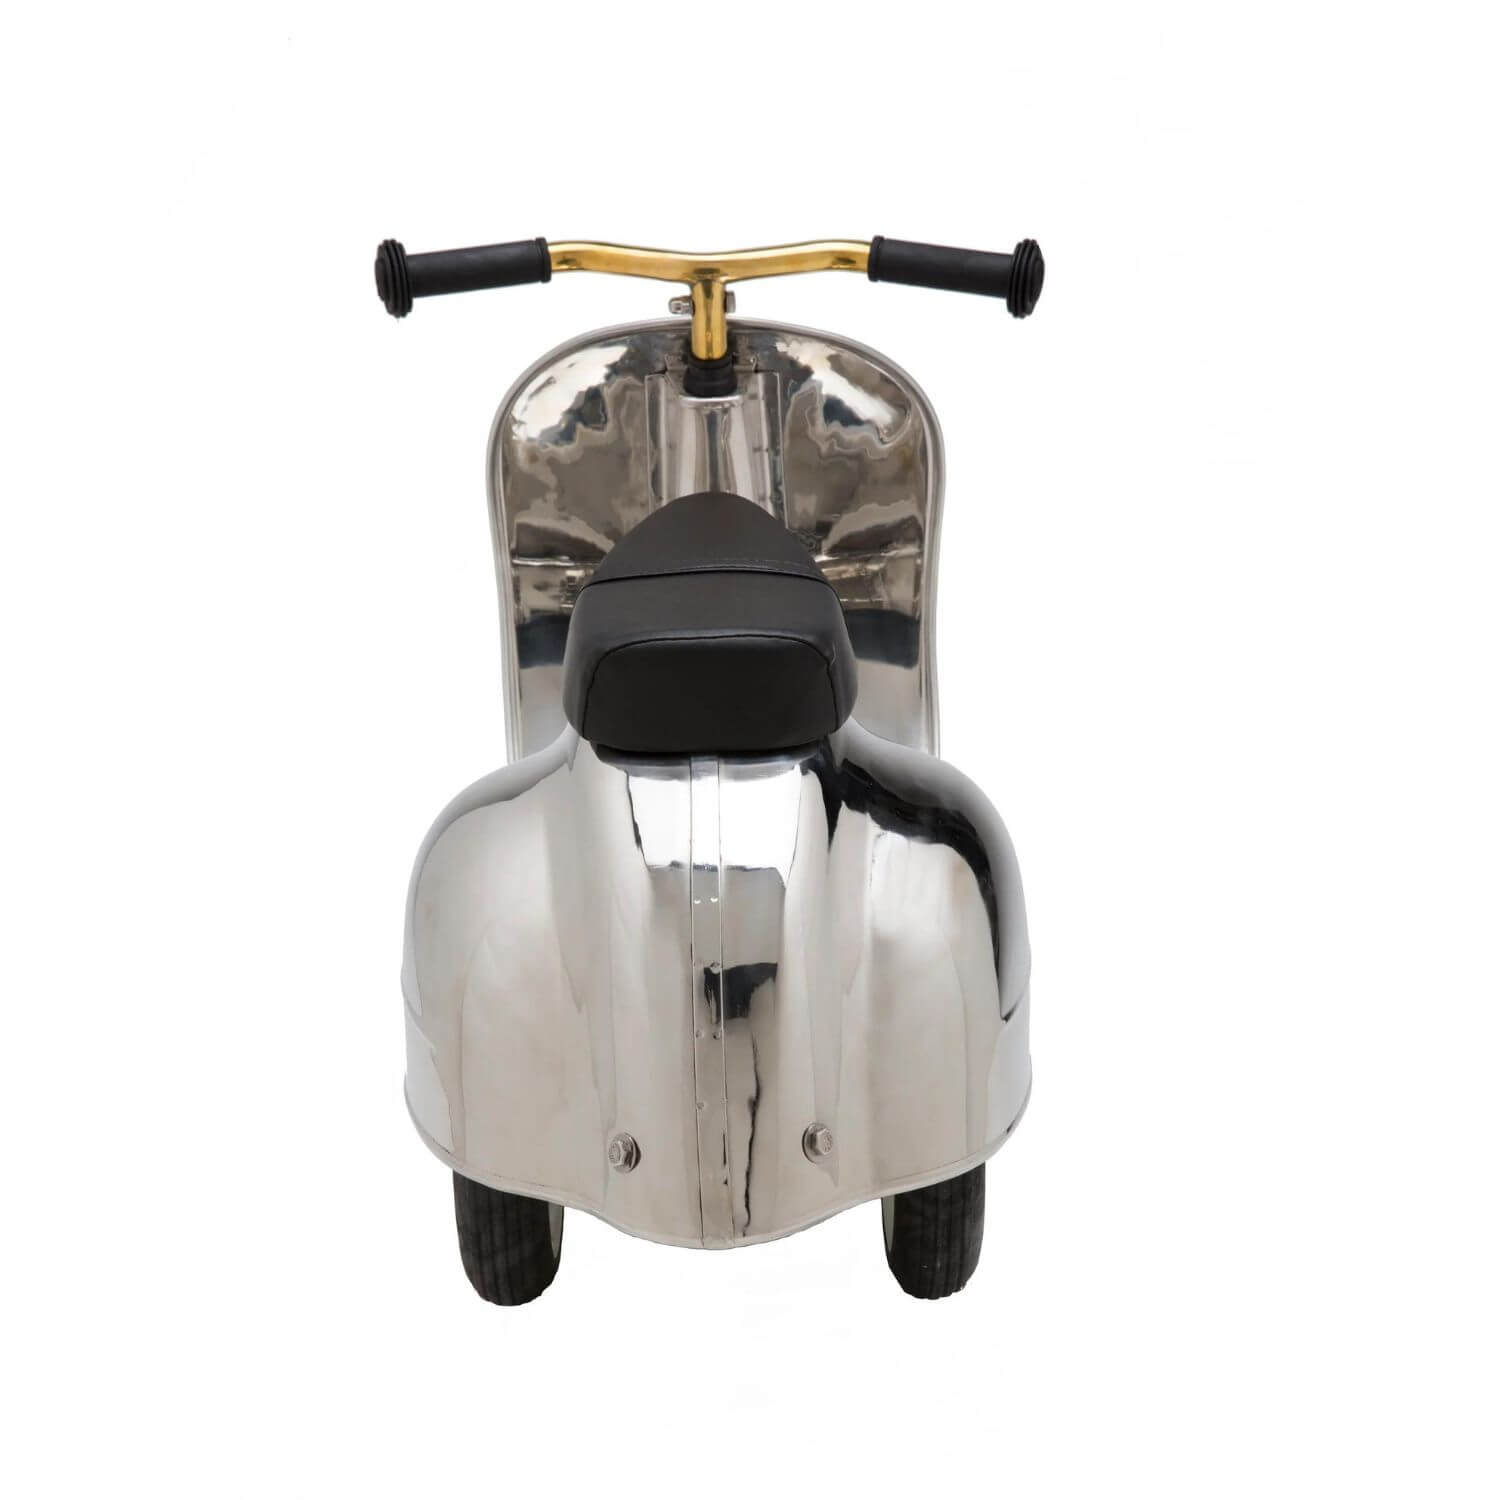 Primo Ride On Kids Toy DELUXE Stainless Steel (Limited Edition) - Back View